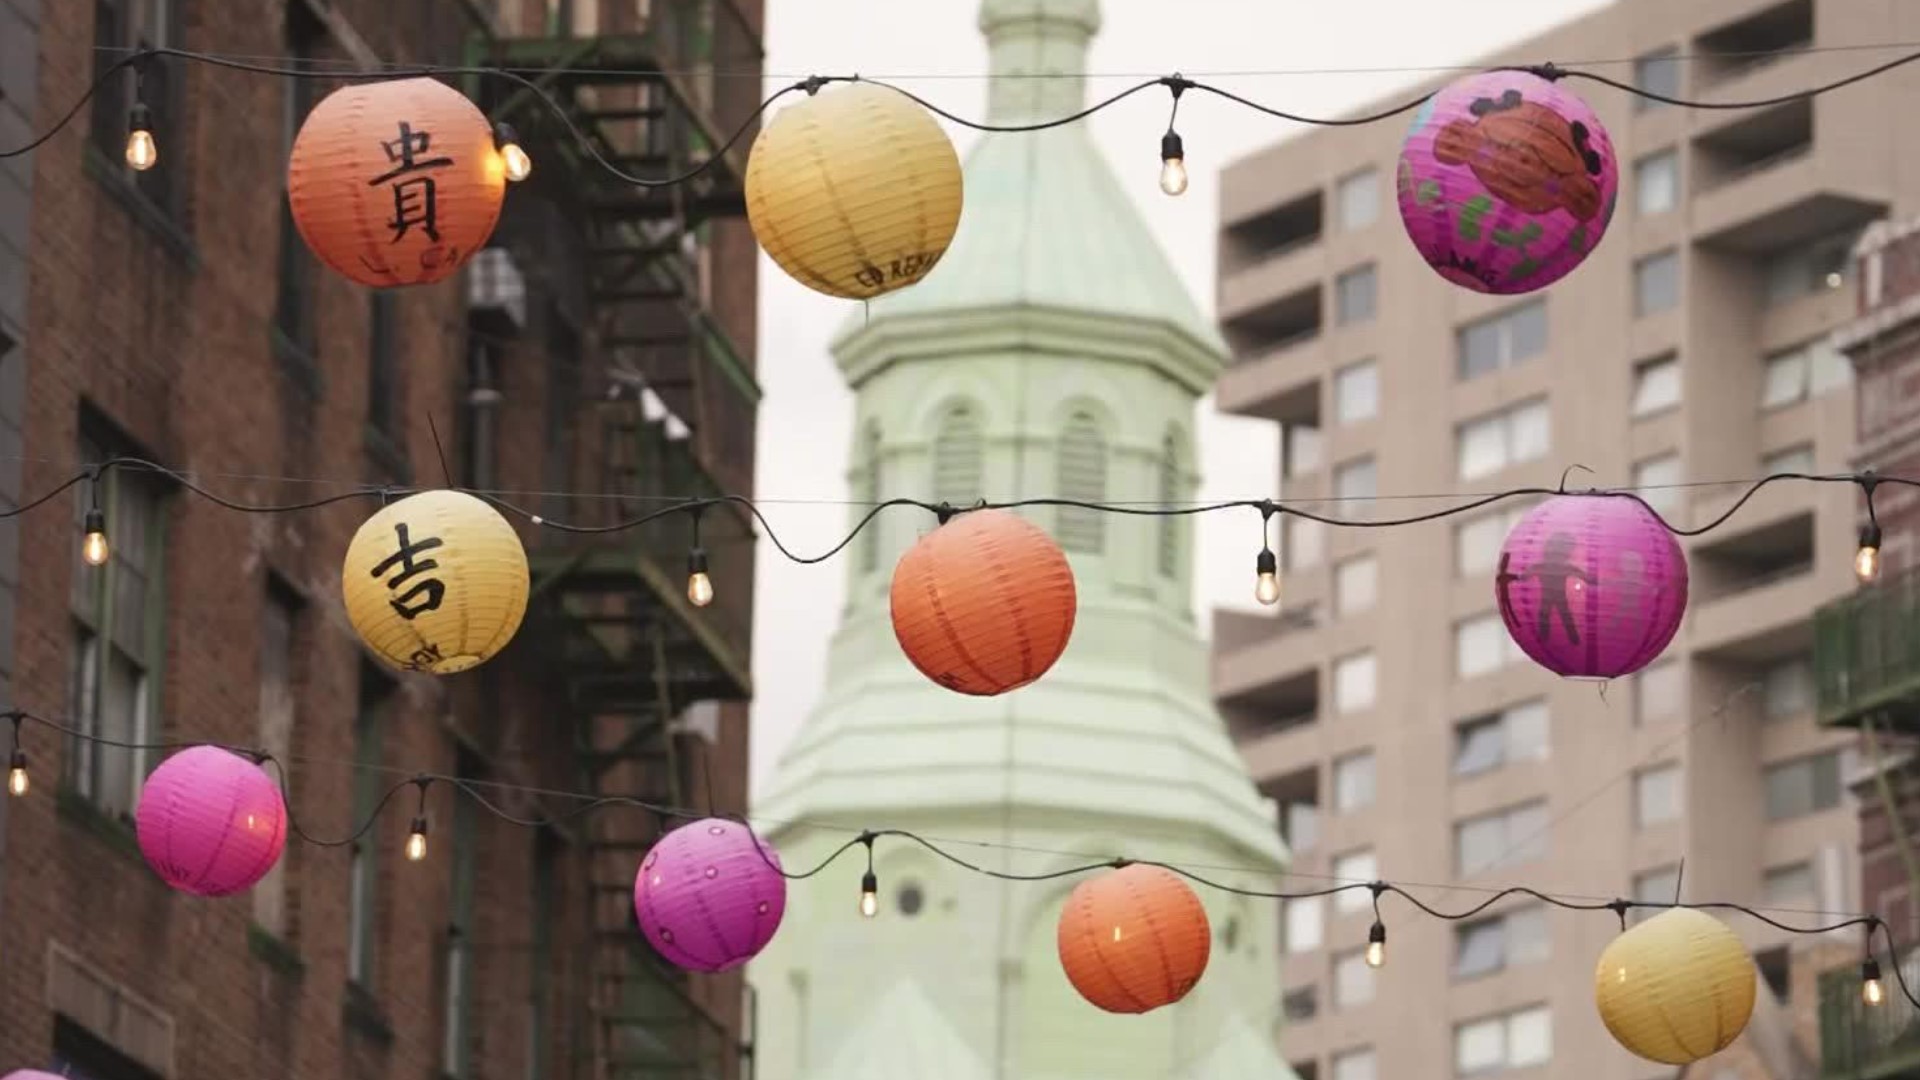 Colorful lanterns fill New York's Chinatown and have been a major attraction for tourists.